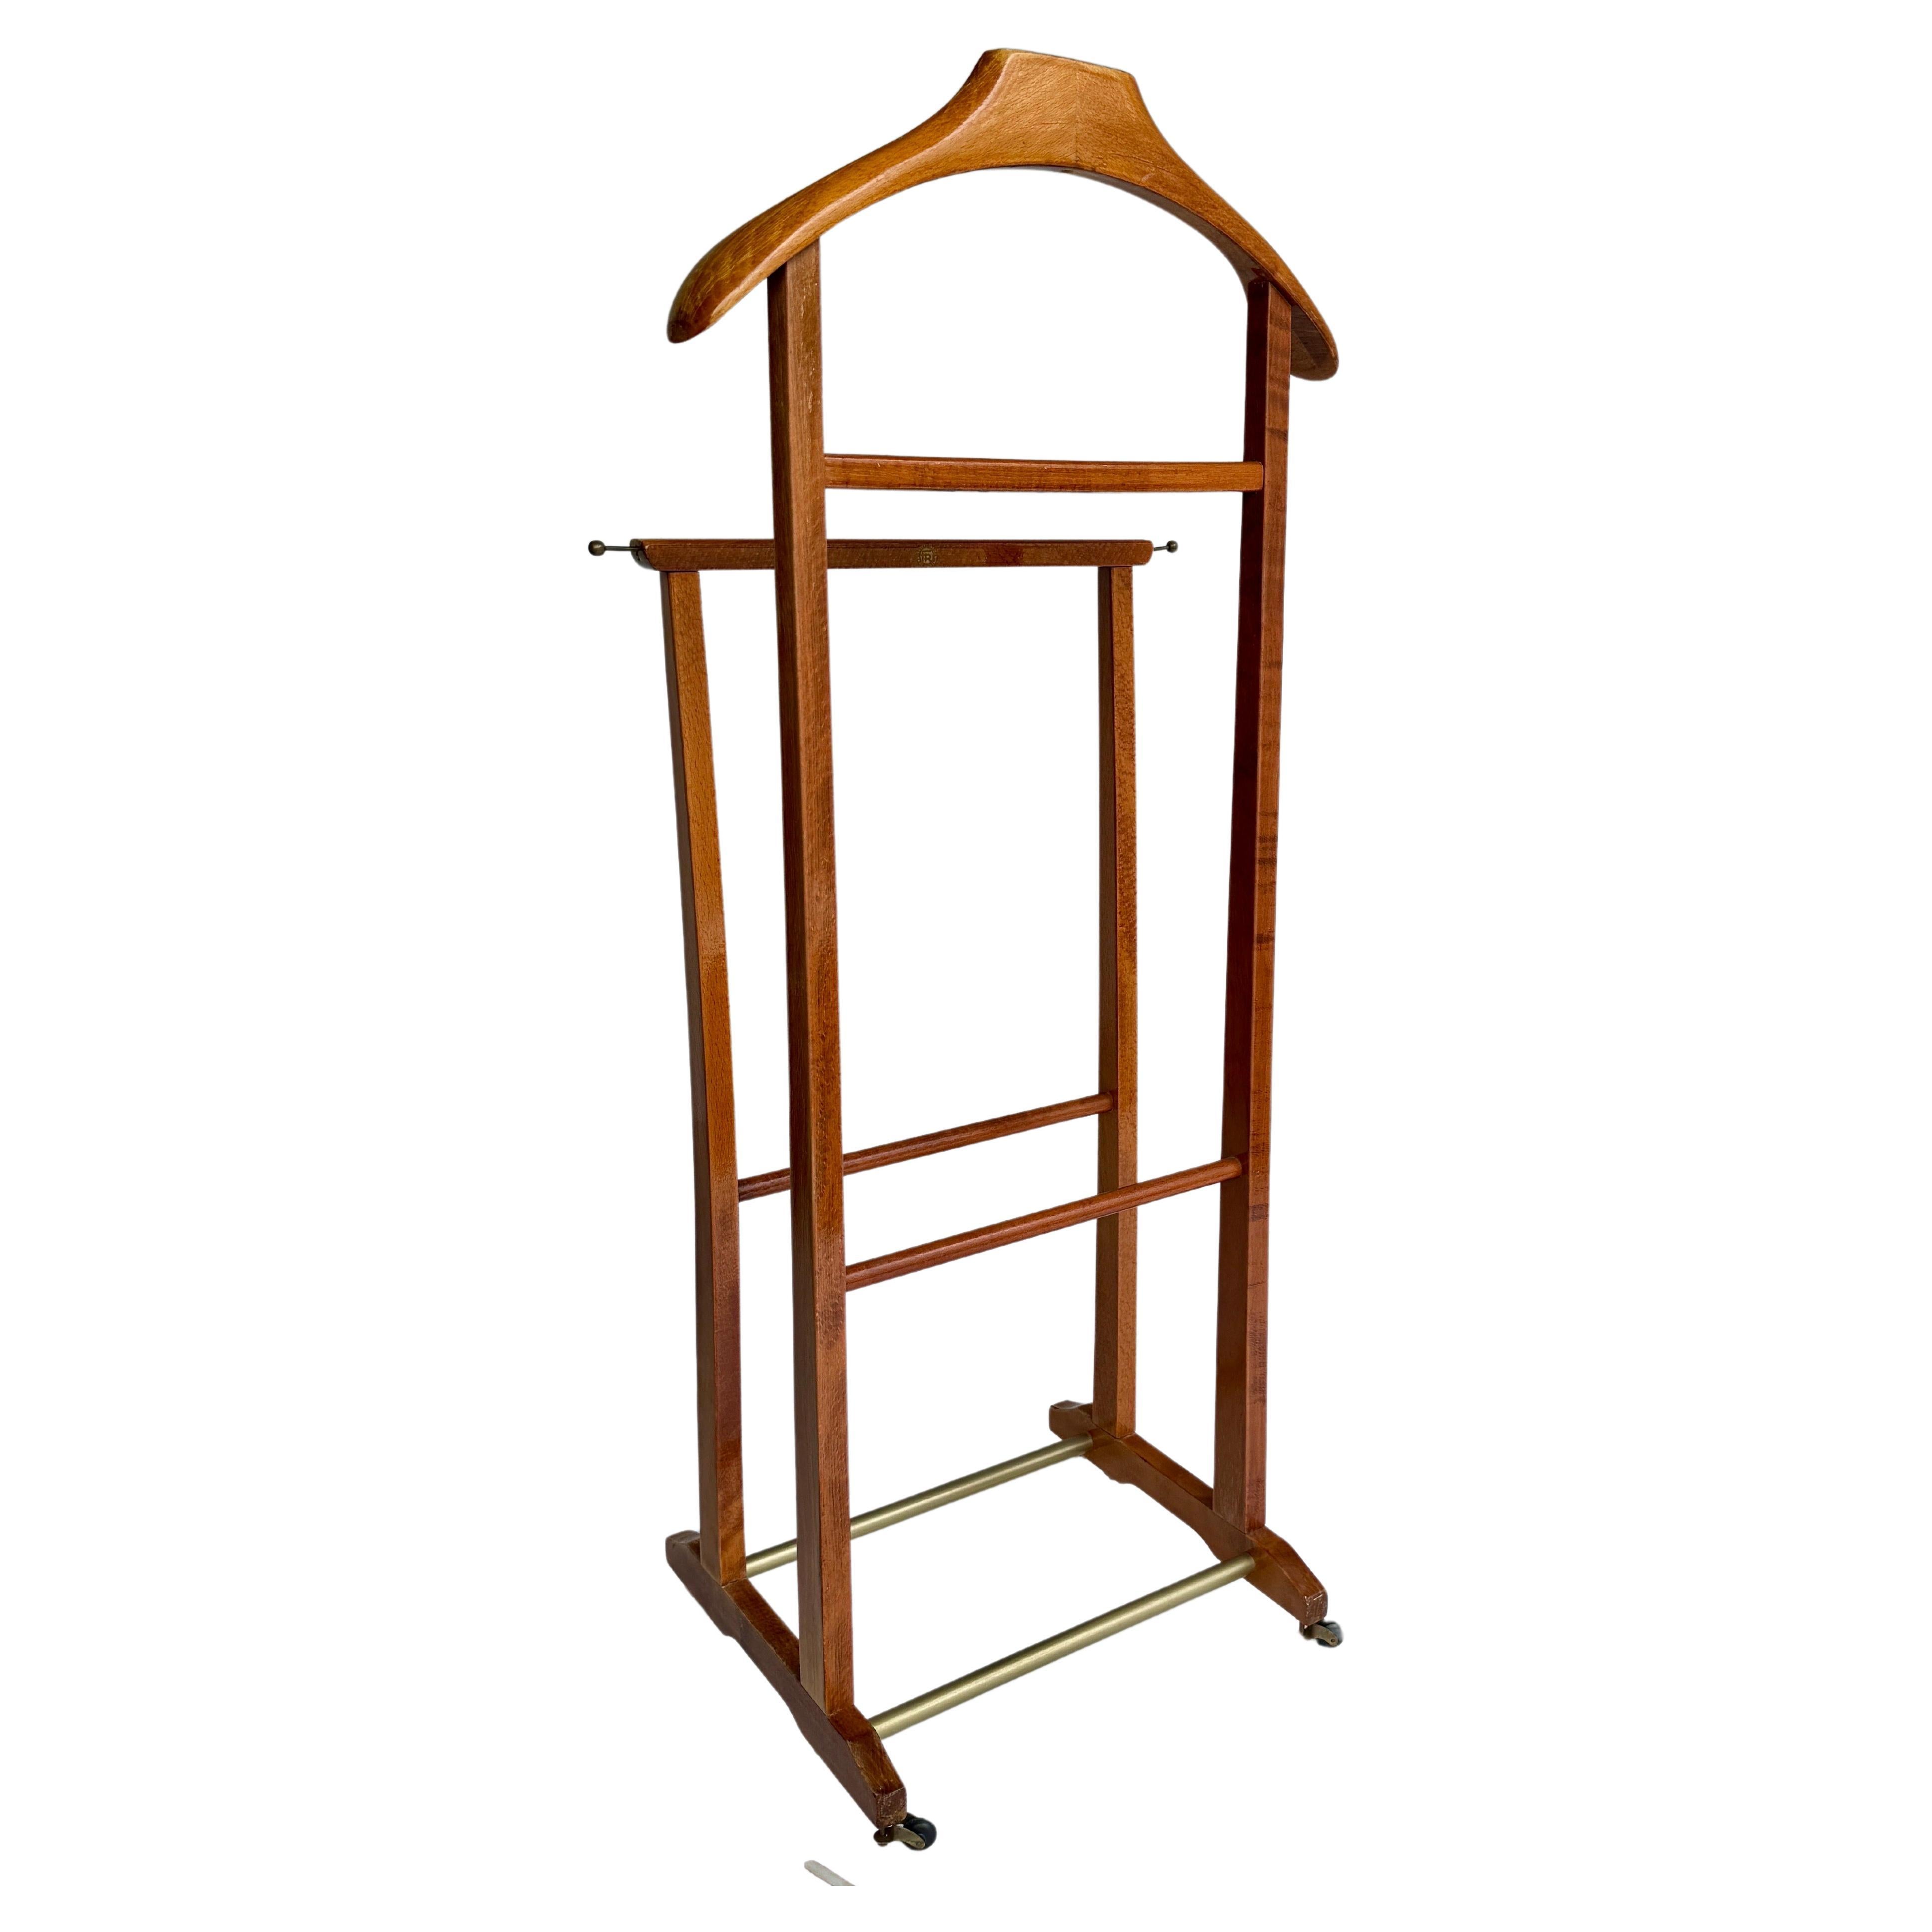 Mid-Century Modern valet stand dressboy, in the manner of Ico and Luisa Parisi. This valet is made by Fratelli Reguitti in the 1960's Italy. 
This vintage beechwood men's valet is elegant and timeless with brass hardware and caster wheels for simple